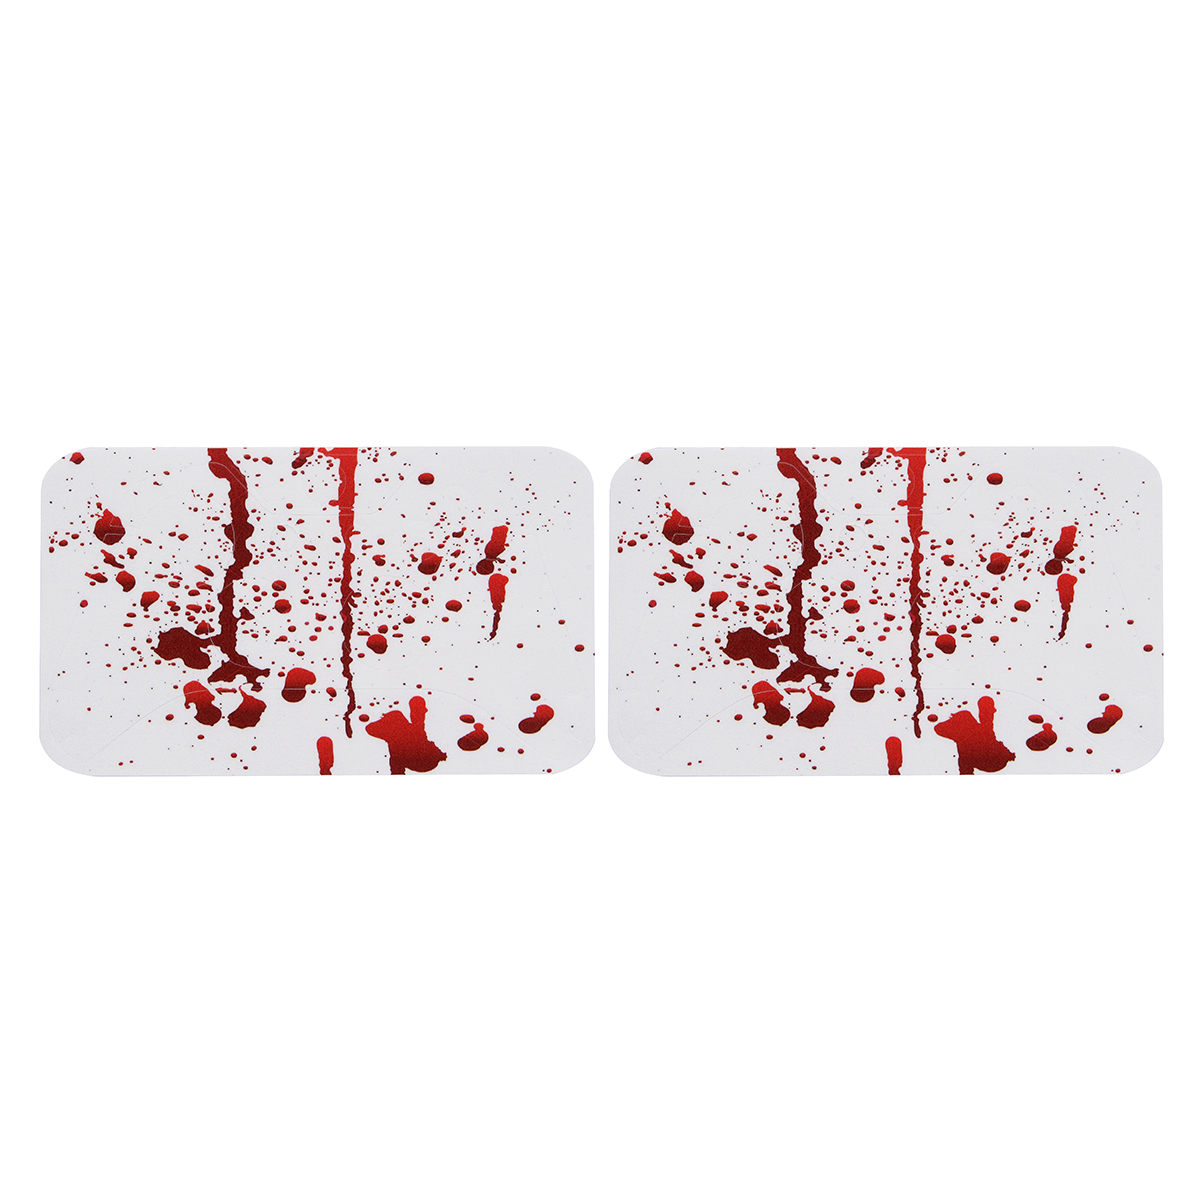 Bloody Skin Decals Stickers Cover for Xbox One S Game Console & 2 Controllers 68